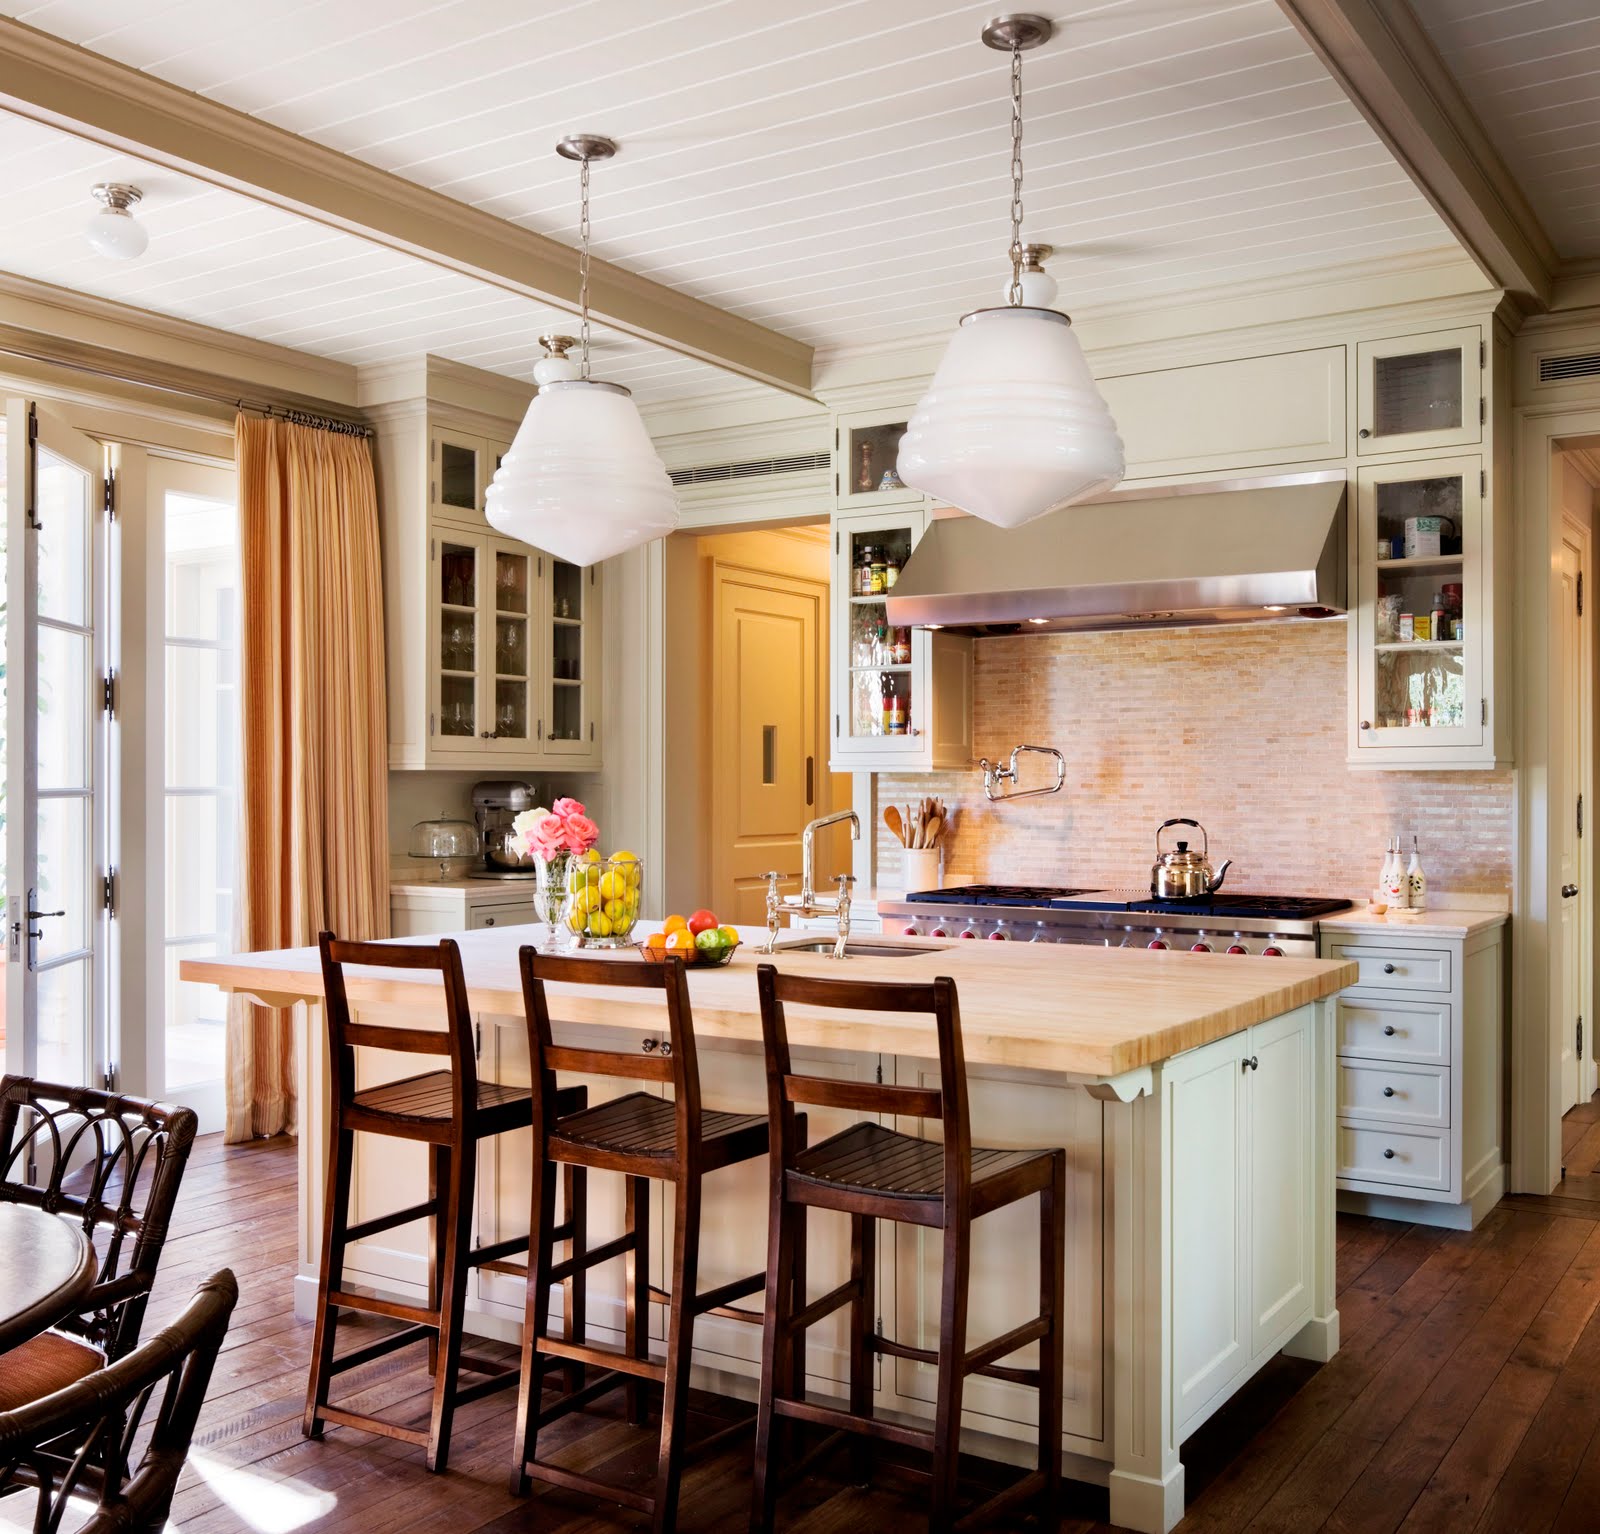 BOOK LOOK: KITCHENS & BATHS BY WHITE HOUSE DECORATOR MICHAEL SMITH ...